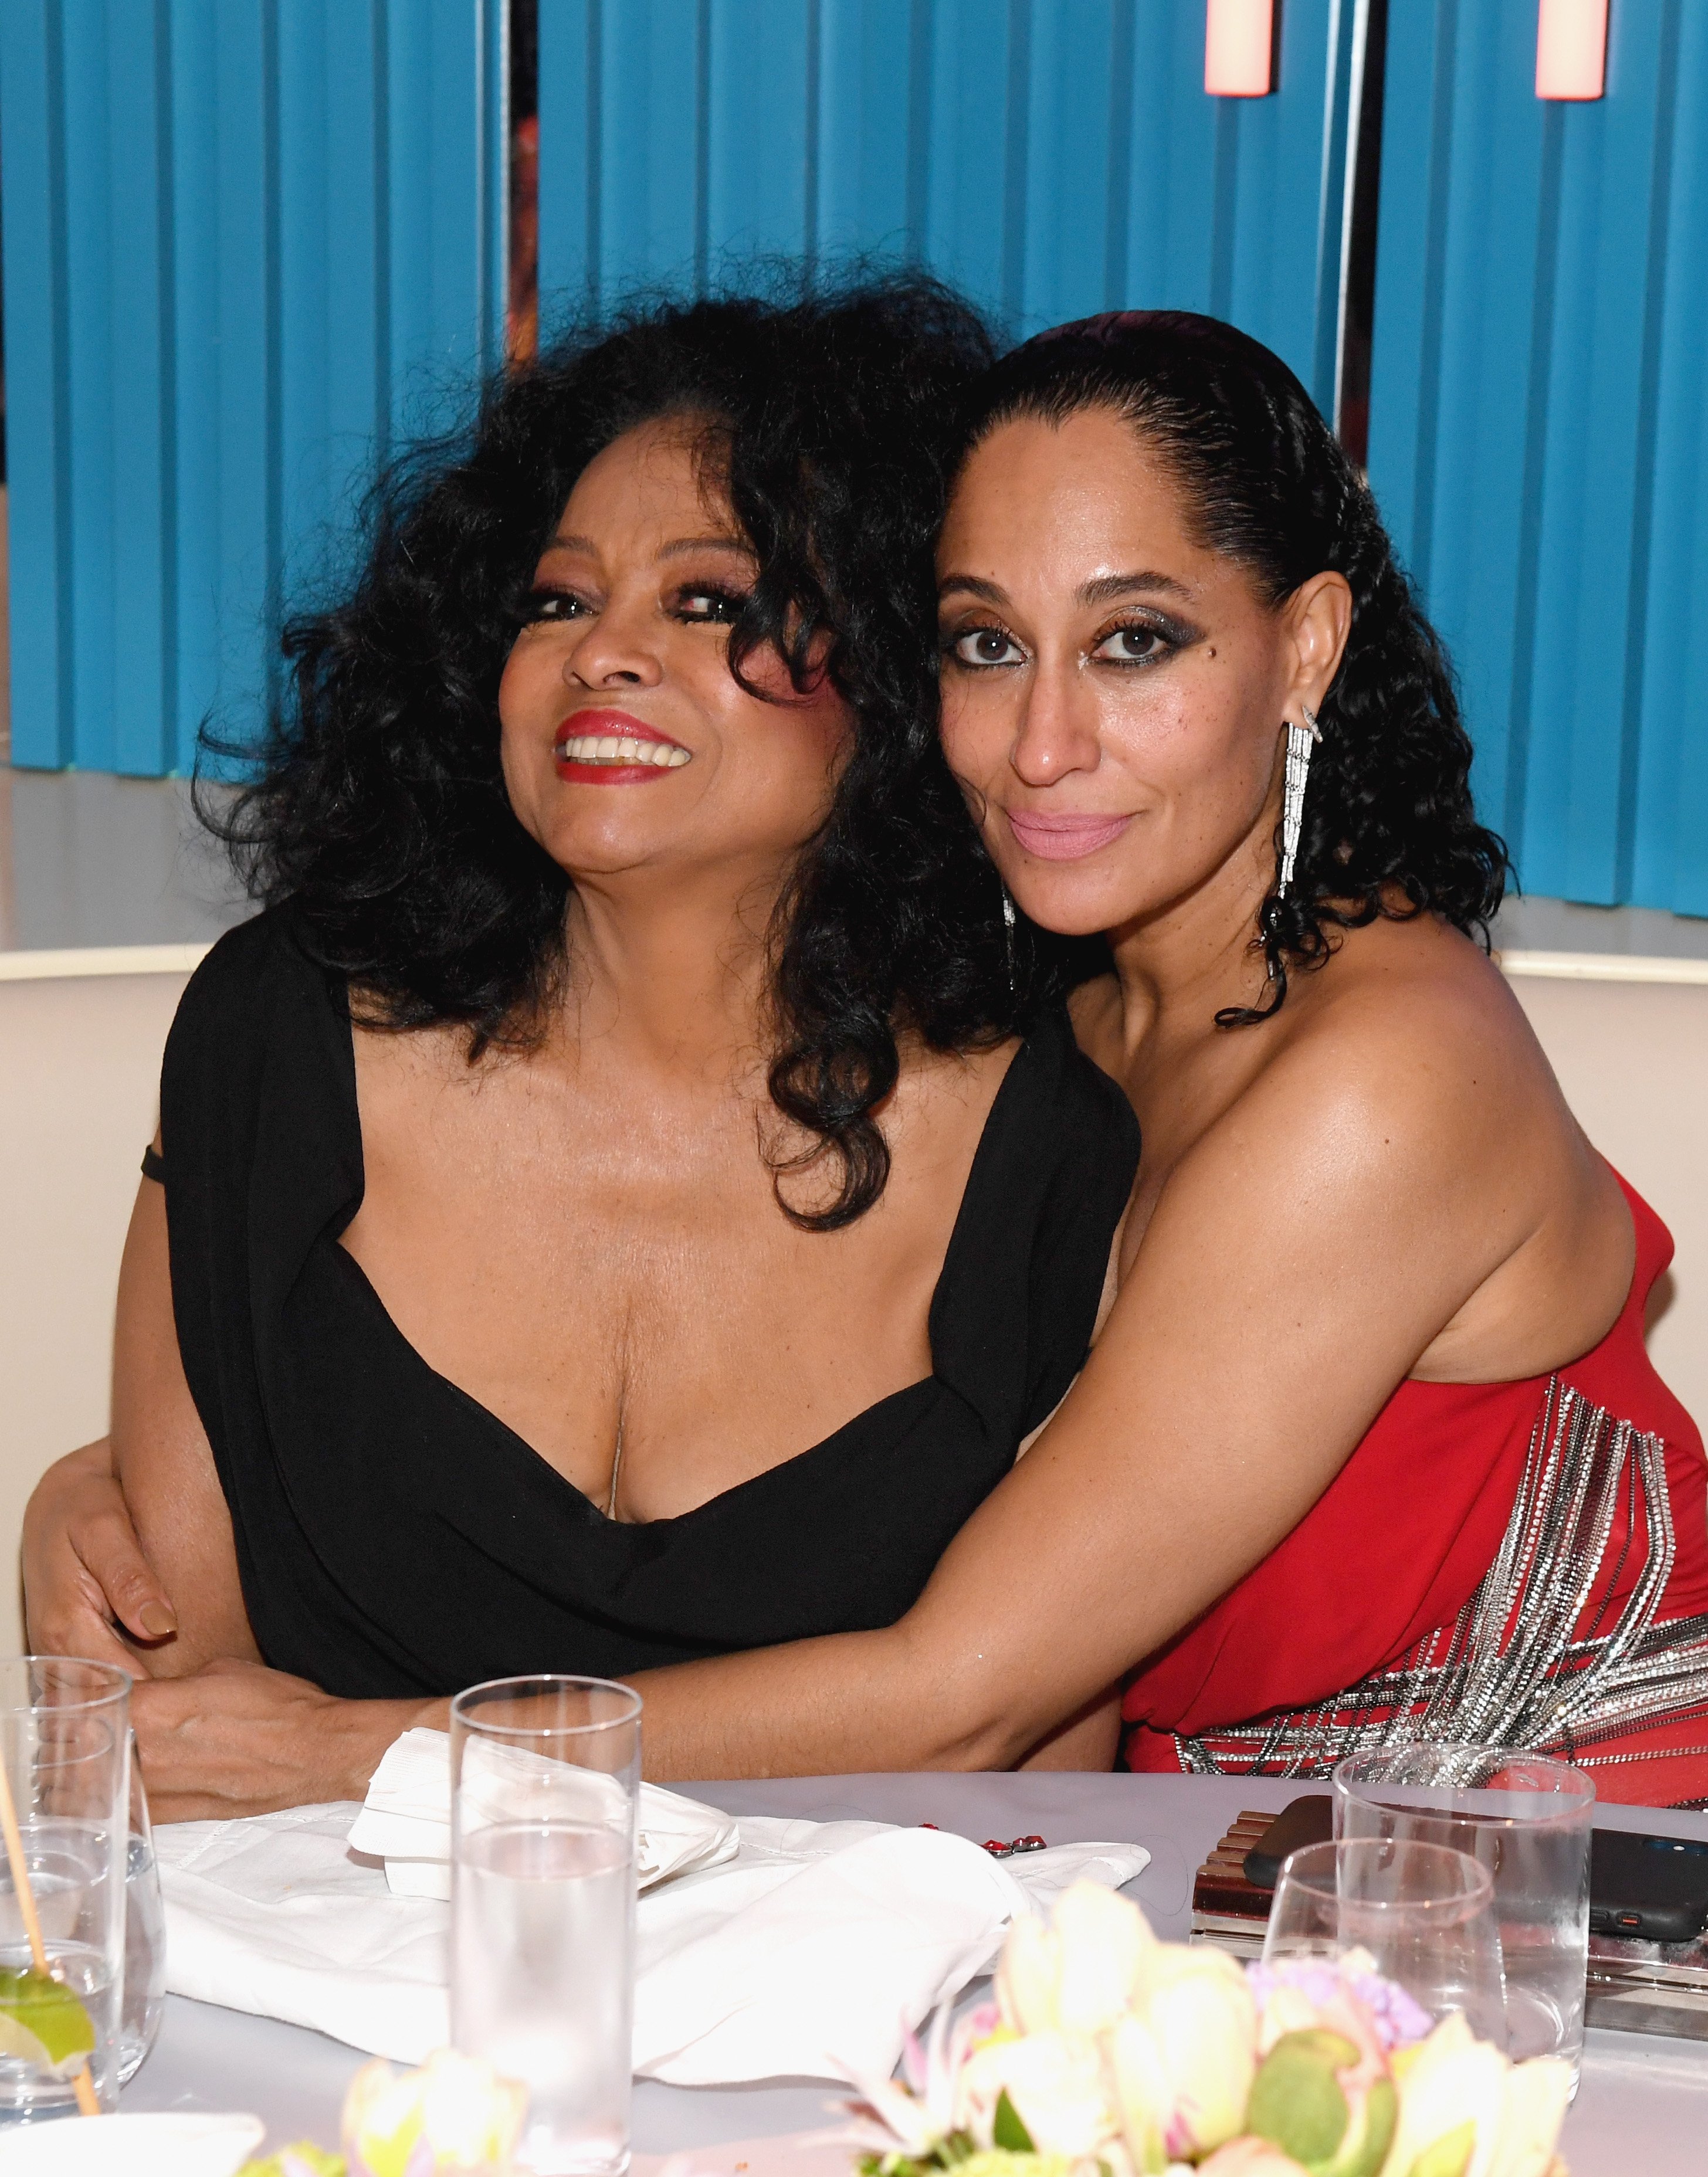 Tracee Ellis Ross hugging her mother, Diana Ross at the 2019 Vanity Fair Oscars Party on February 24, 2019 in Beverly Hills, California. | Photo: Getty Images